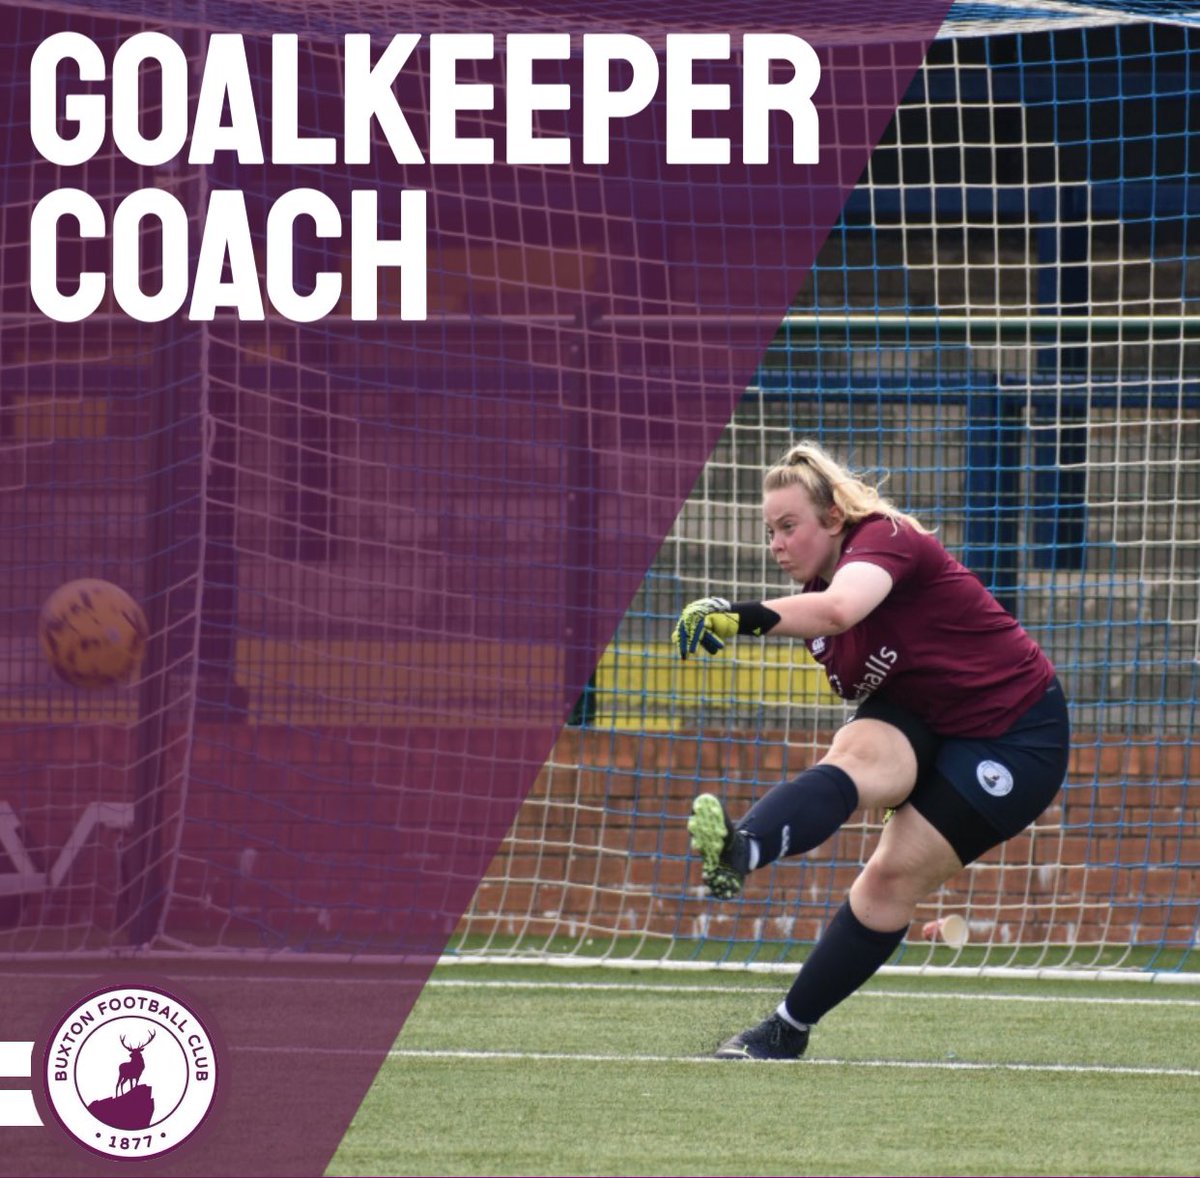 🧤 We are on the lookout for a Goalkpeer Coach to join our team on a voluntary basis. 

👉🏼 Train - Thurs 6-7:30pm
👉🏼 Match - Sun 1.30pm
👉🏼 Coach Qual required
👉🏼 Safeguarding/First Aid
👉🏼 FA DBS required

Register interest via carl.taylor@buxtonfc.com.

#UpTheBucks | #TeamBuxton